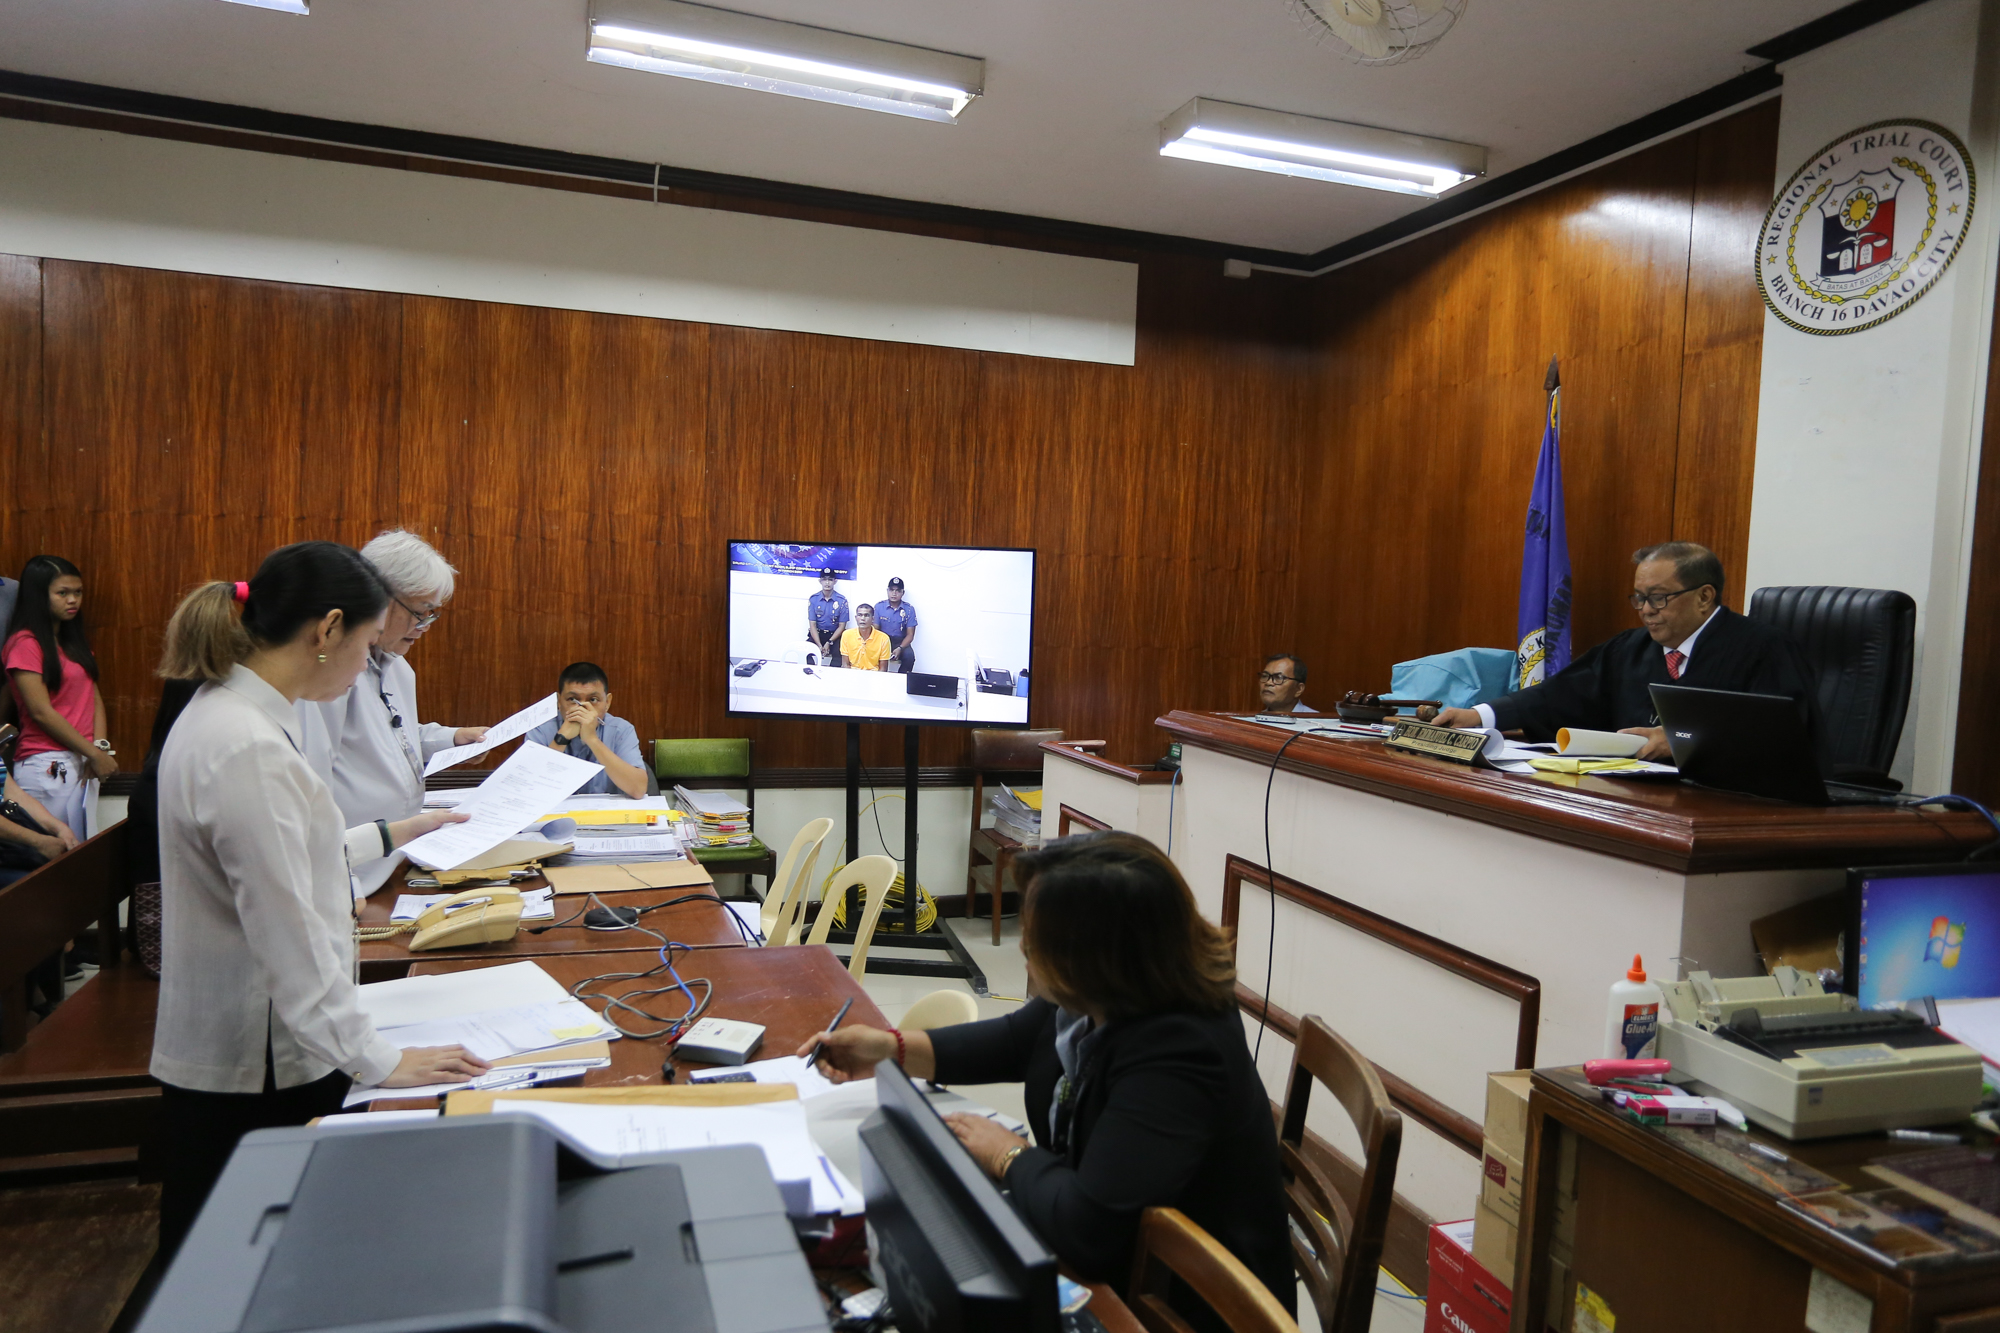 Davao City court holds first ever teleconference hearings in PH